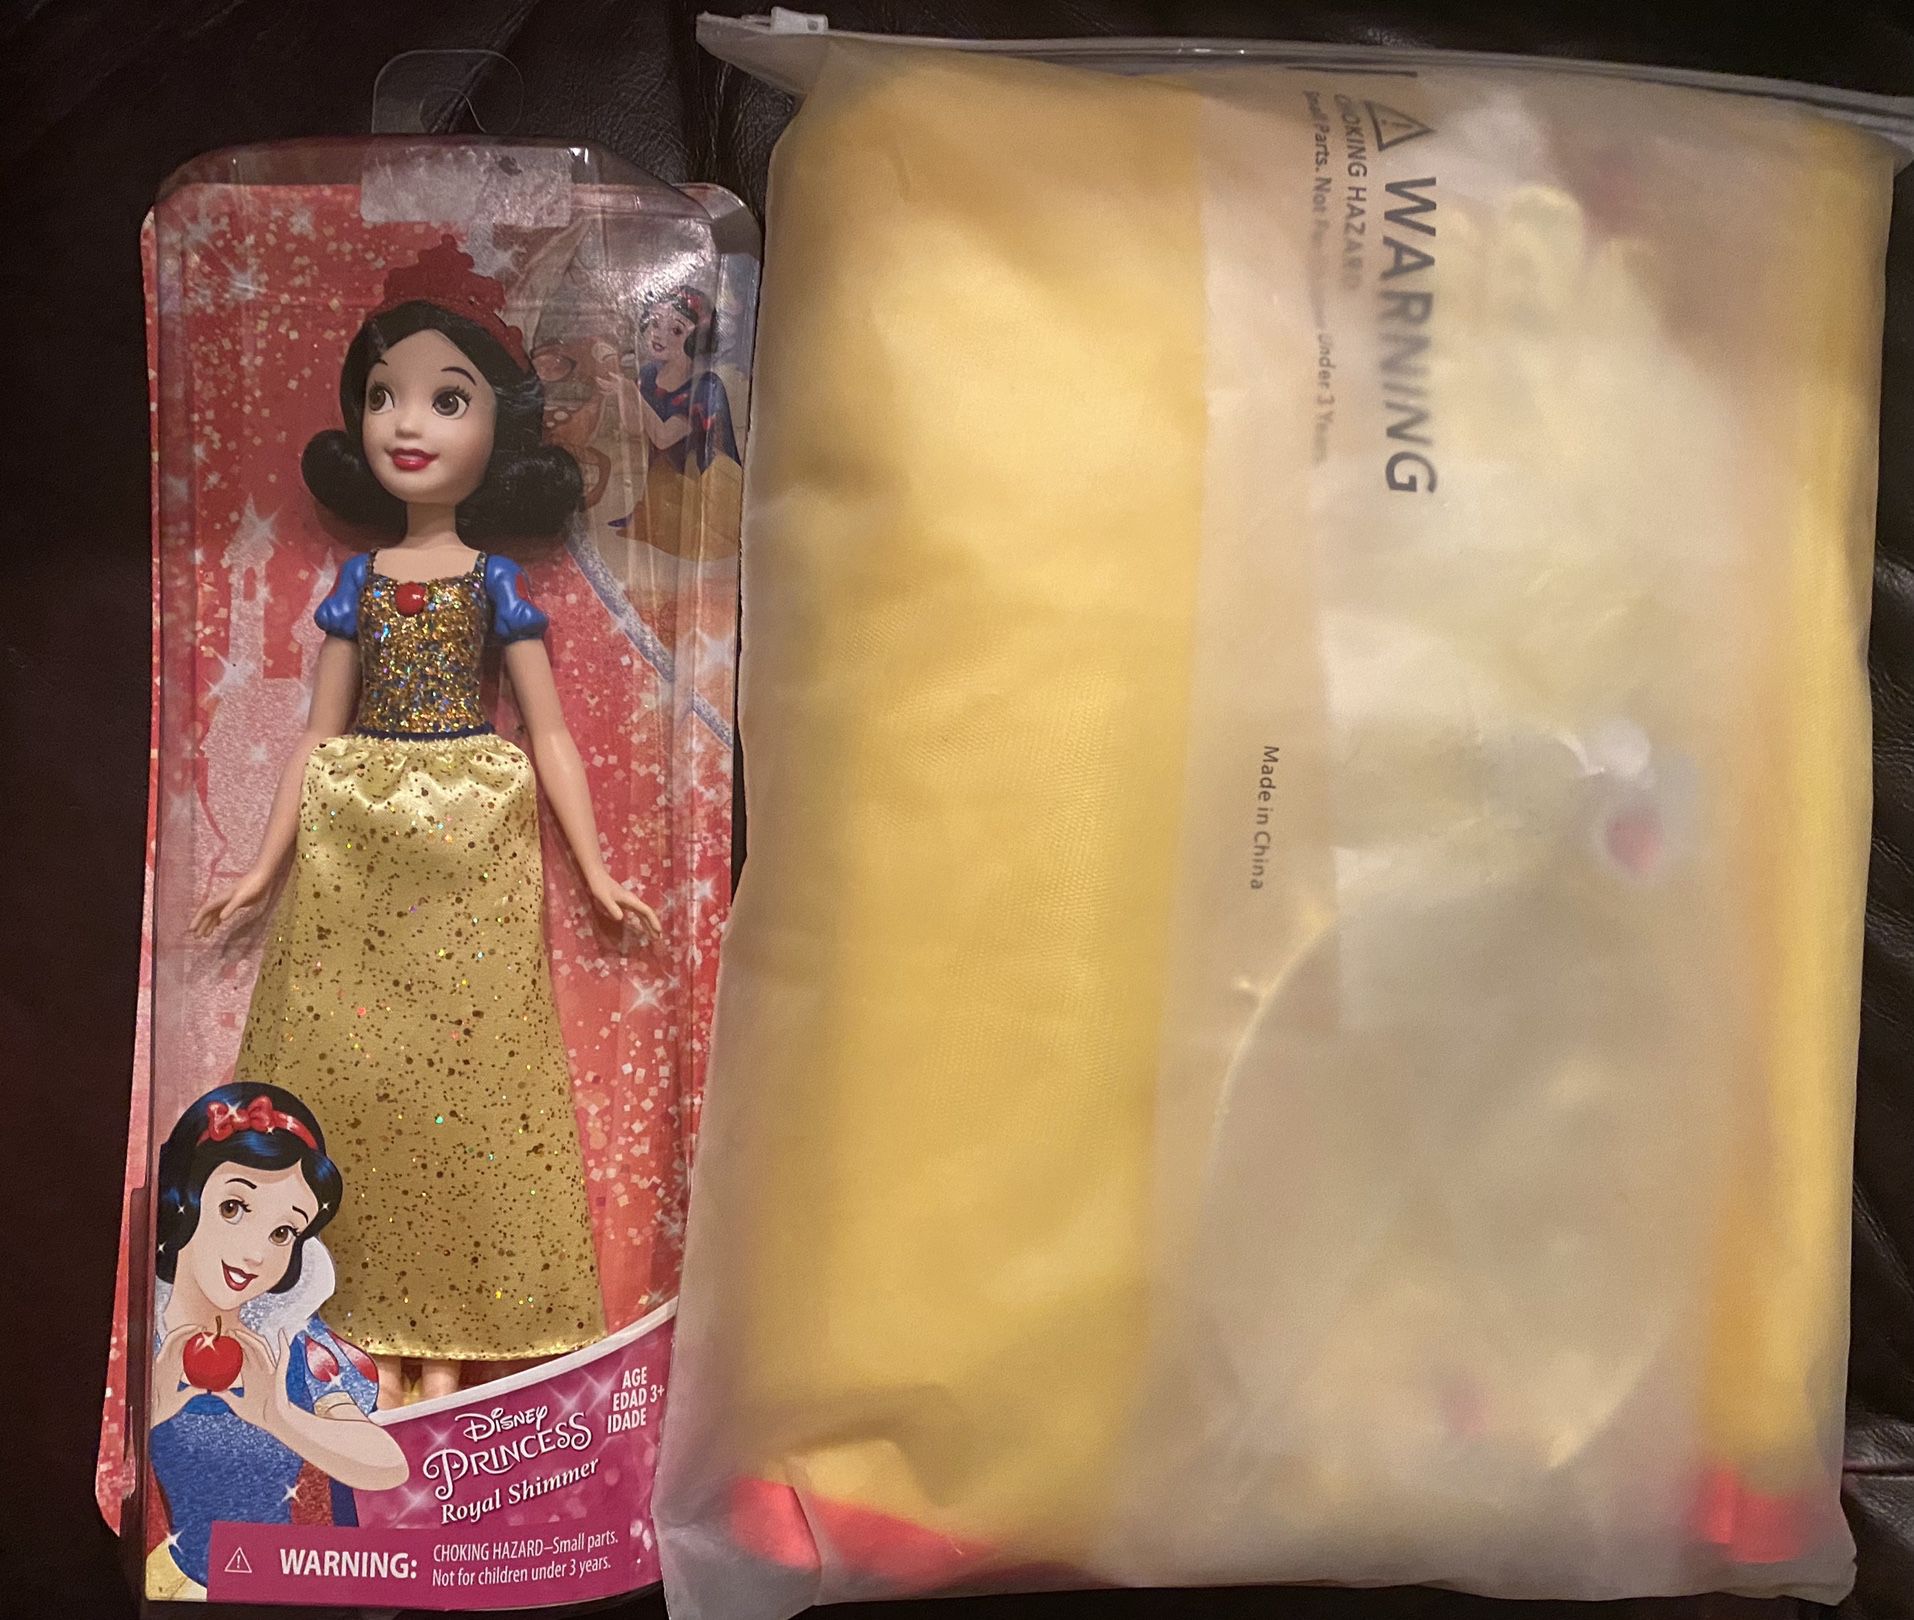 Brand New! Sealed Box Disney Princess Snow White Doll And Dress Up Set Size 8 Complete Tiara Gloves Wand Jewelry + Costume Holiday Gift Royal Shimmer 